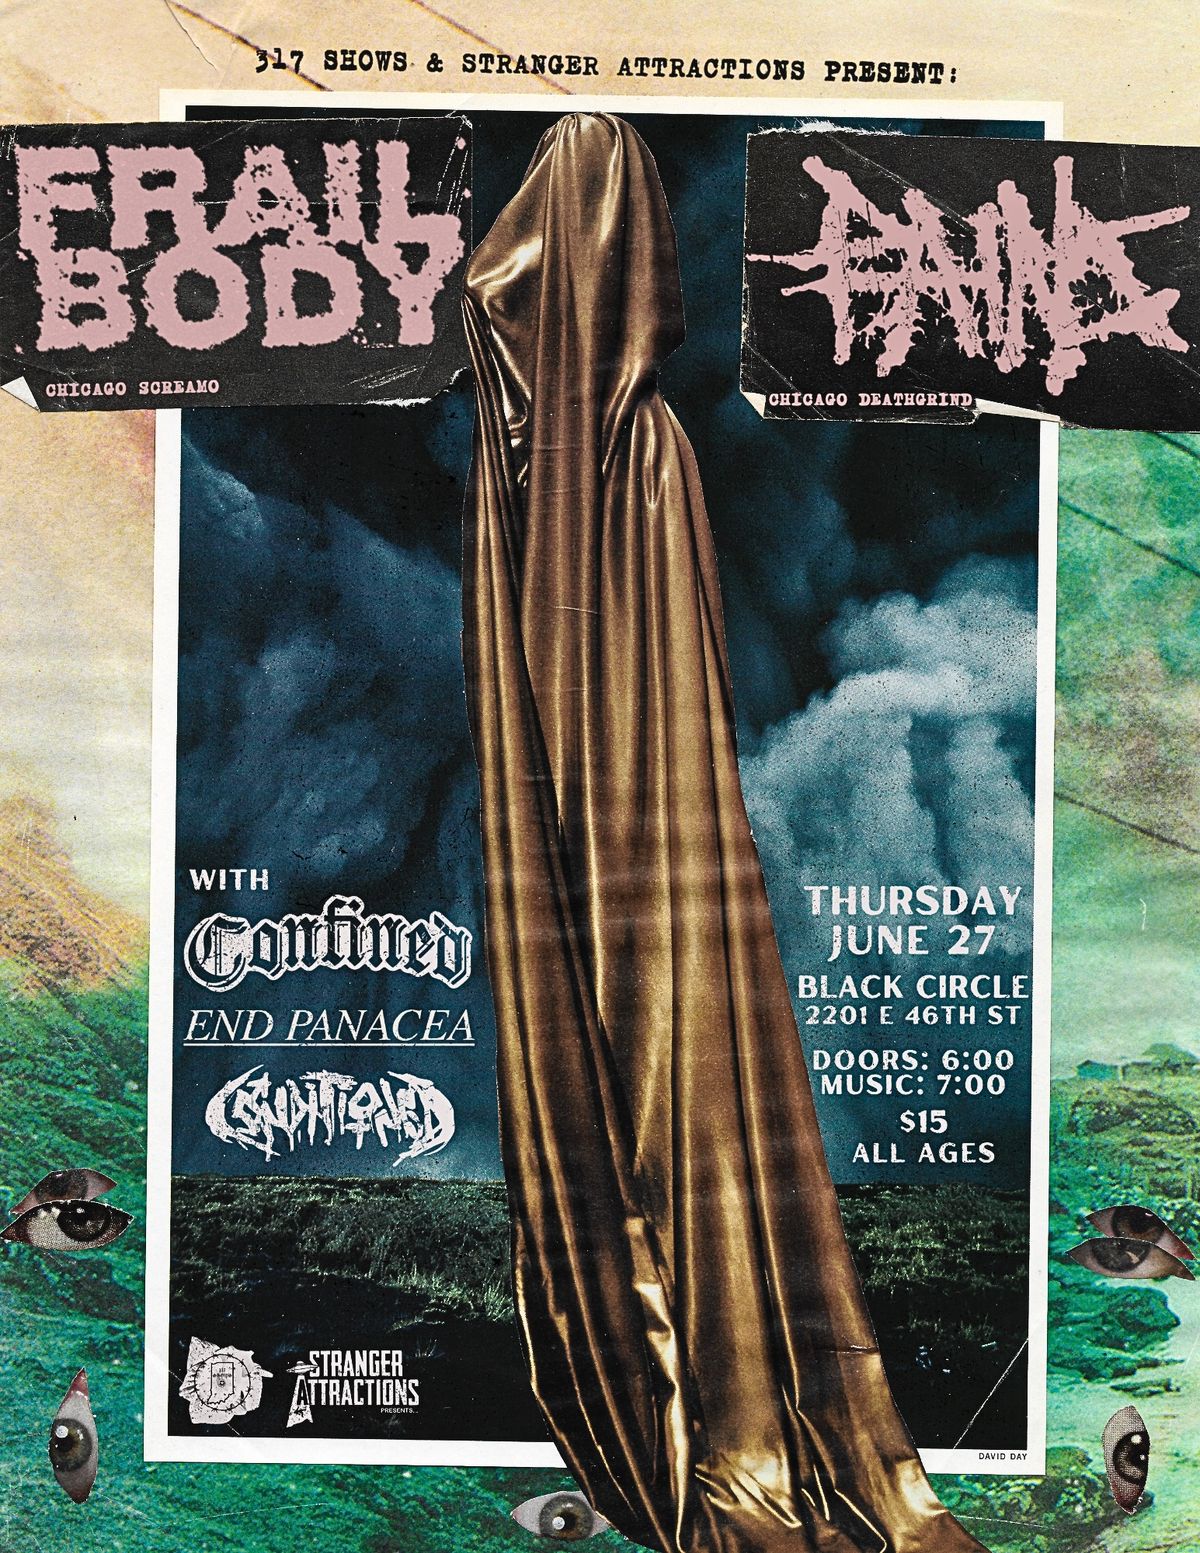 Stranger Attractions & 317 Shows Presents FRAIL BODY w\/ PAINS and more!! 